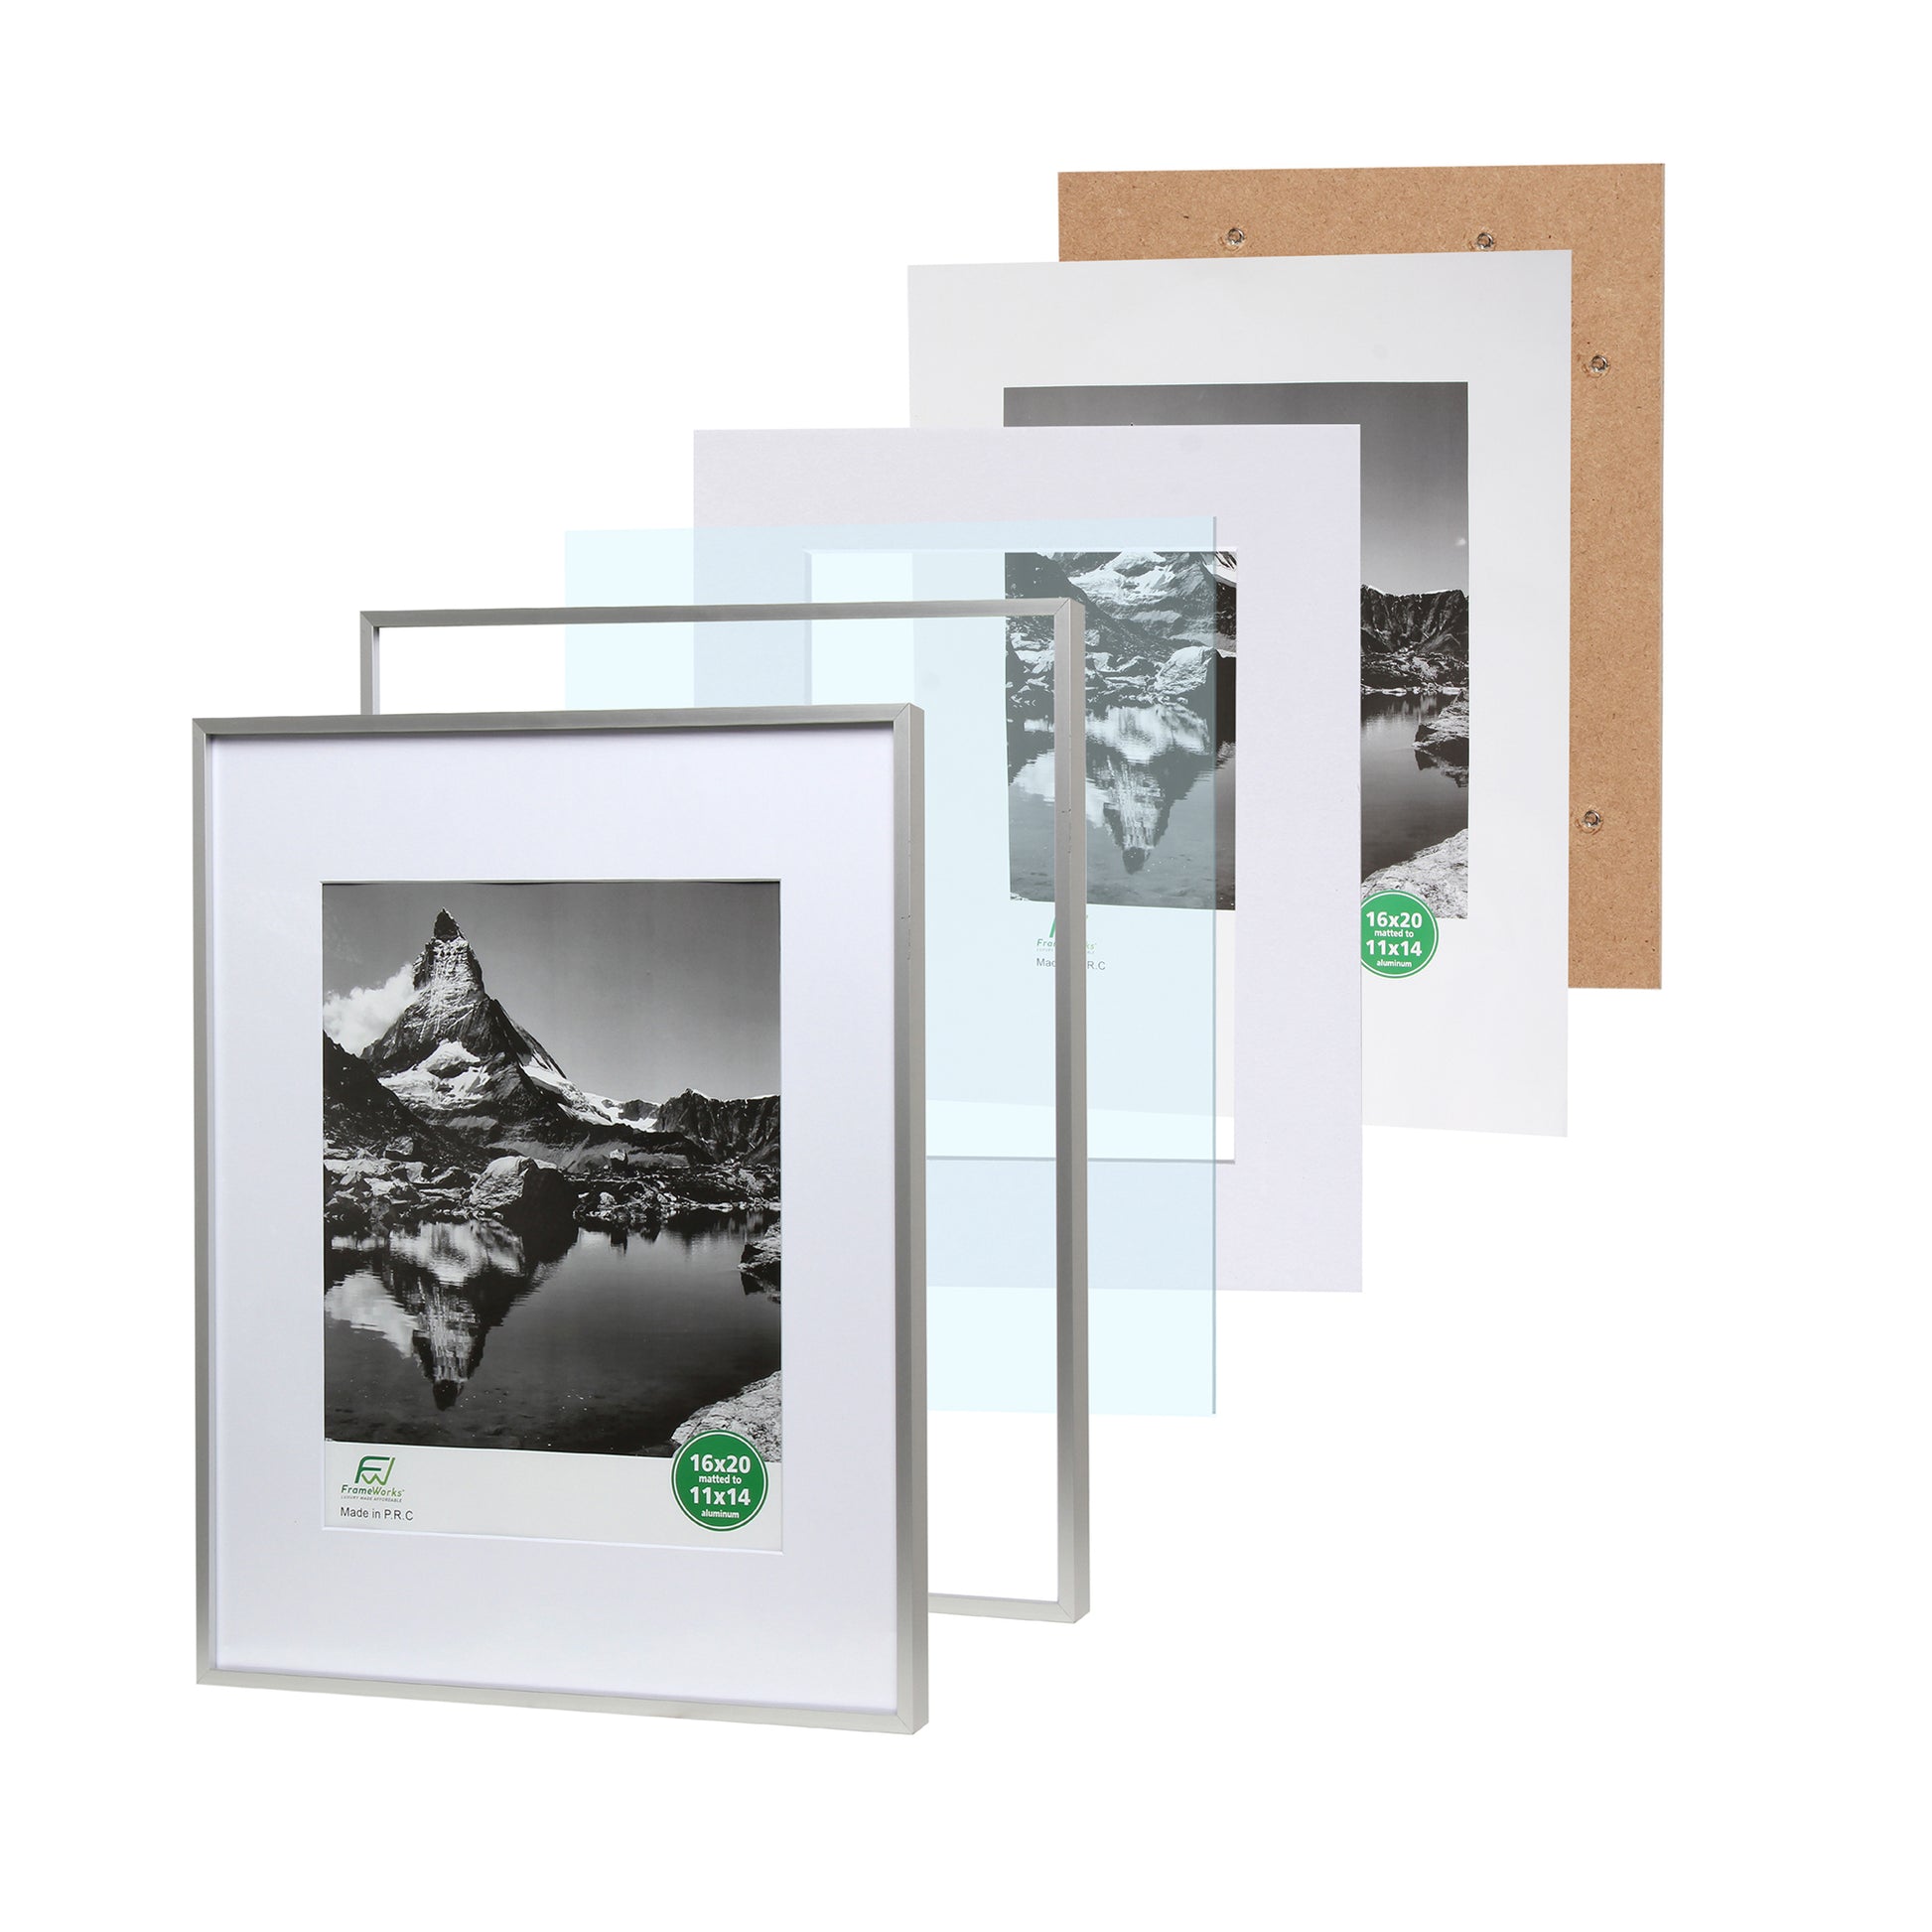 16 x 20 Deluxe Silver Aluminum Contemporary Picture Frame, 11 x 14 –  FrameWorks